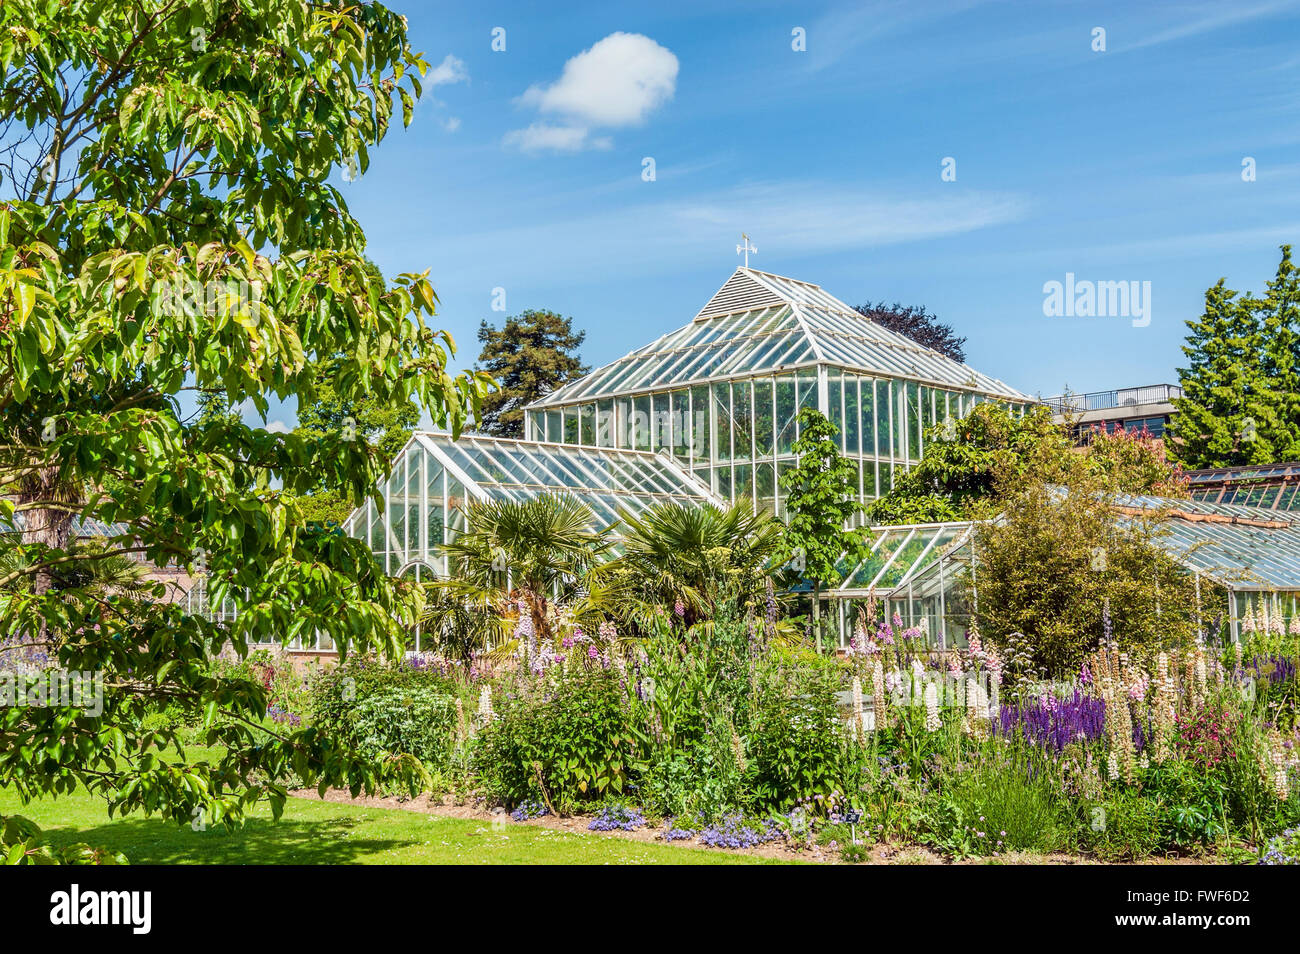 Spring flowers in front of the Glasshouse at the Cambridge University Botanic Garden, England. Stock Photo